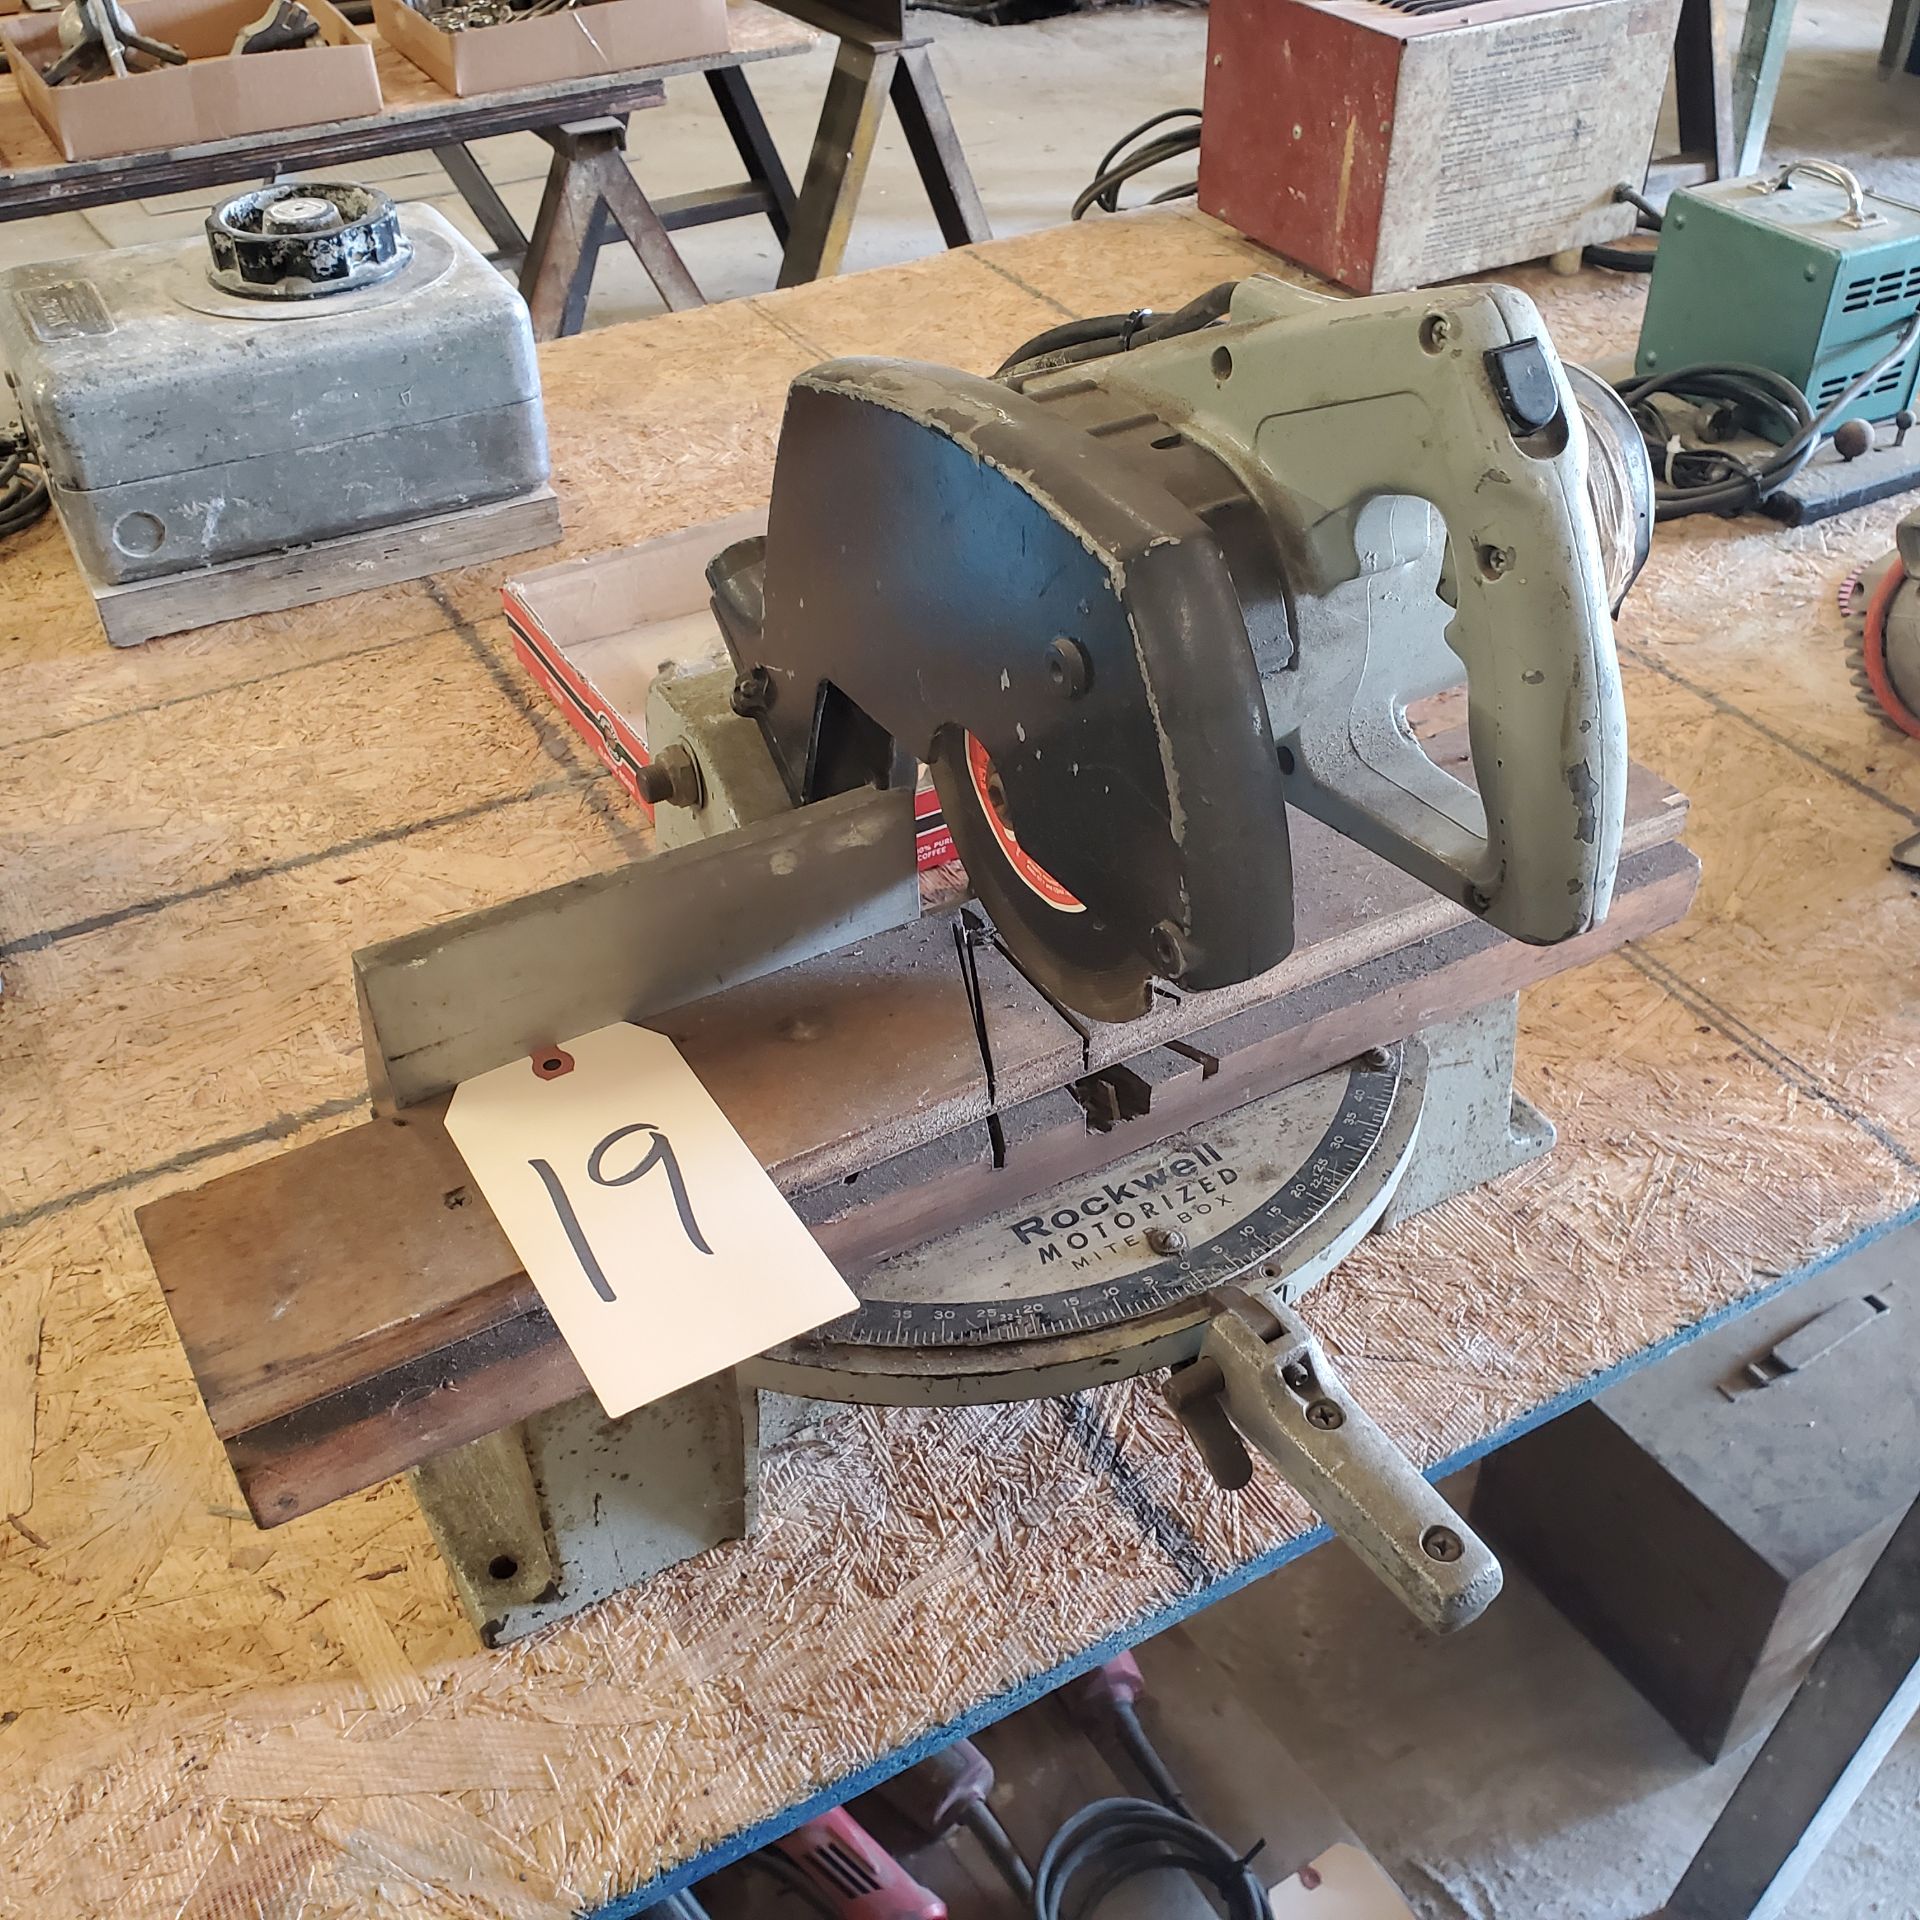 Rockwell #34-010 Mitre Saw, S/N 101780